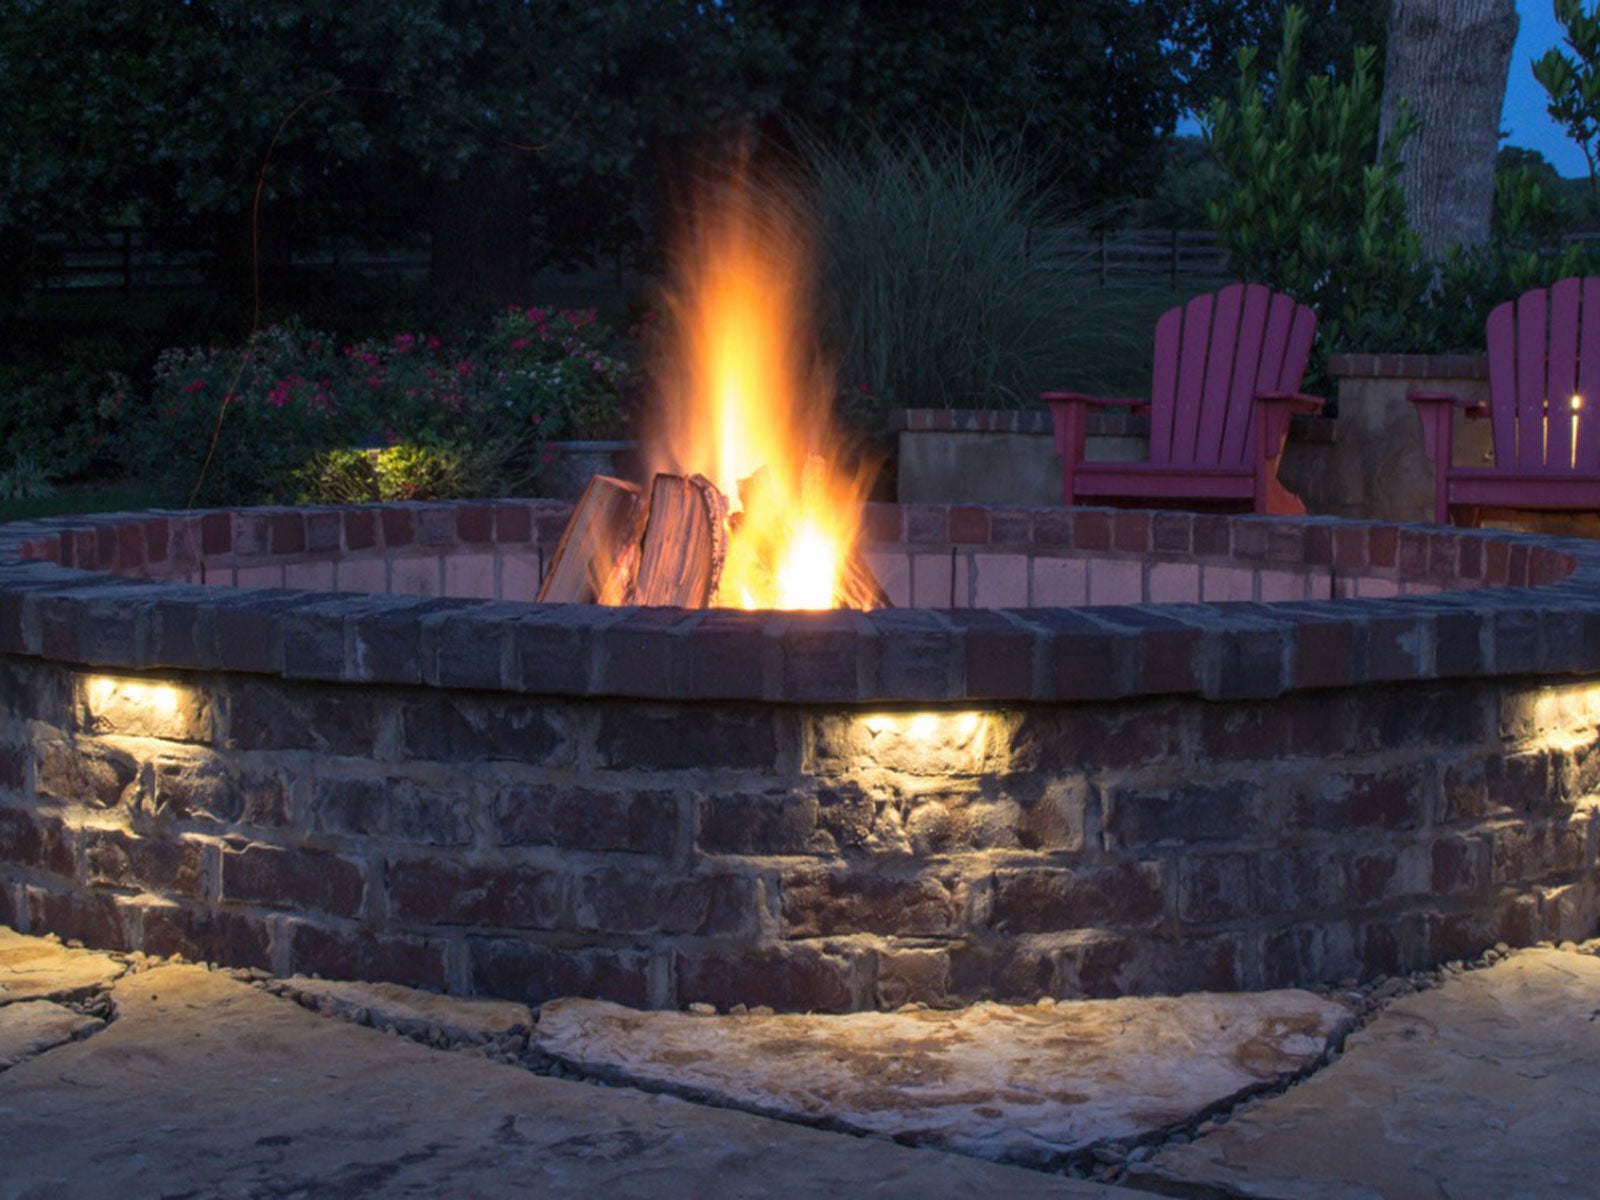 Fire Pit Backyard Safety How To Make A Safe Fire Pit In Your Backyard